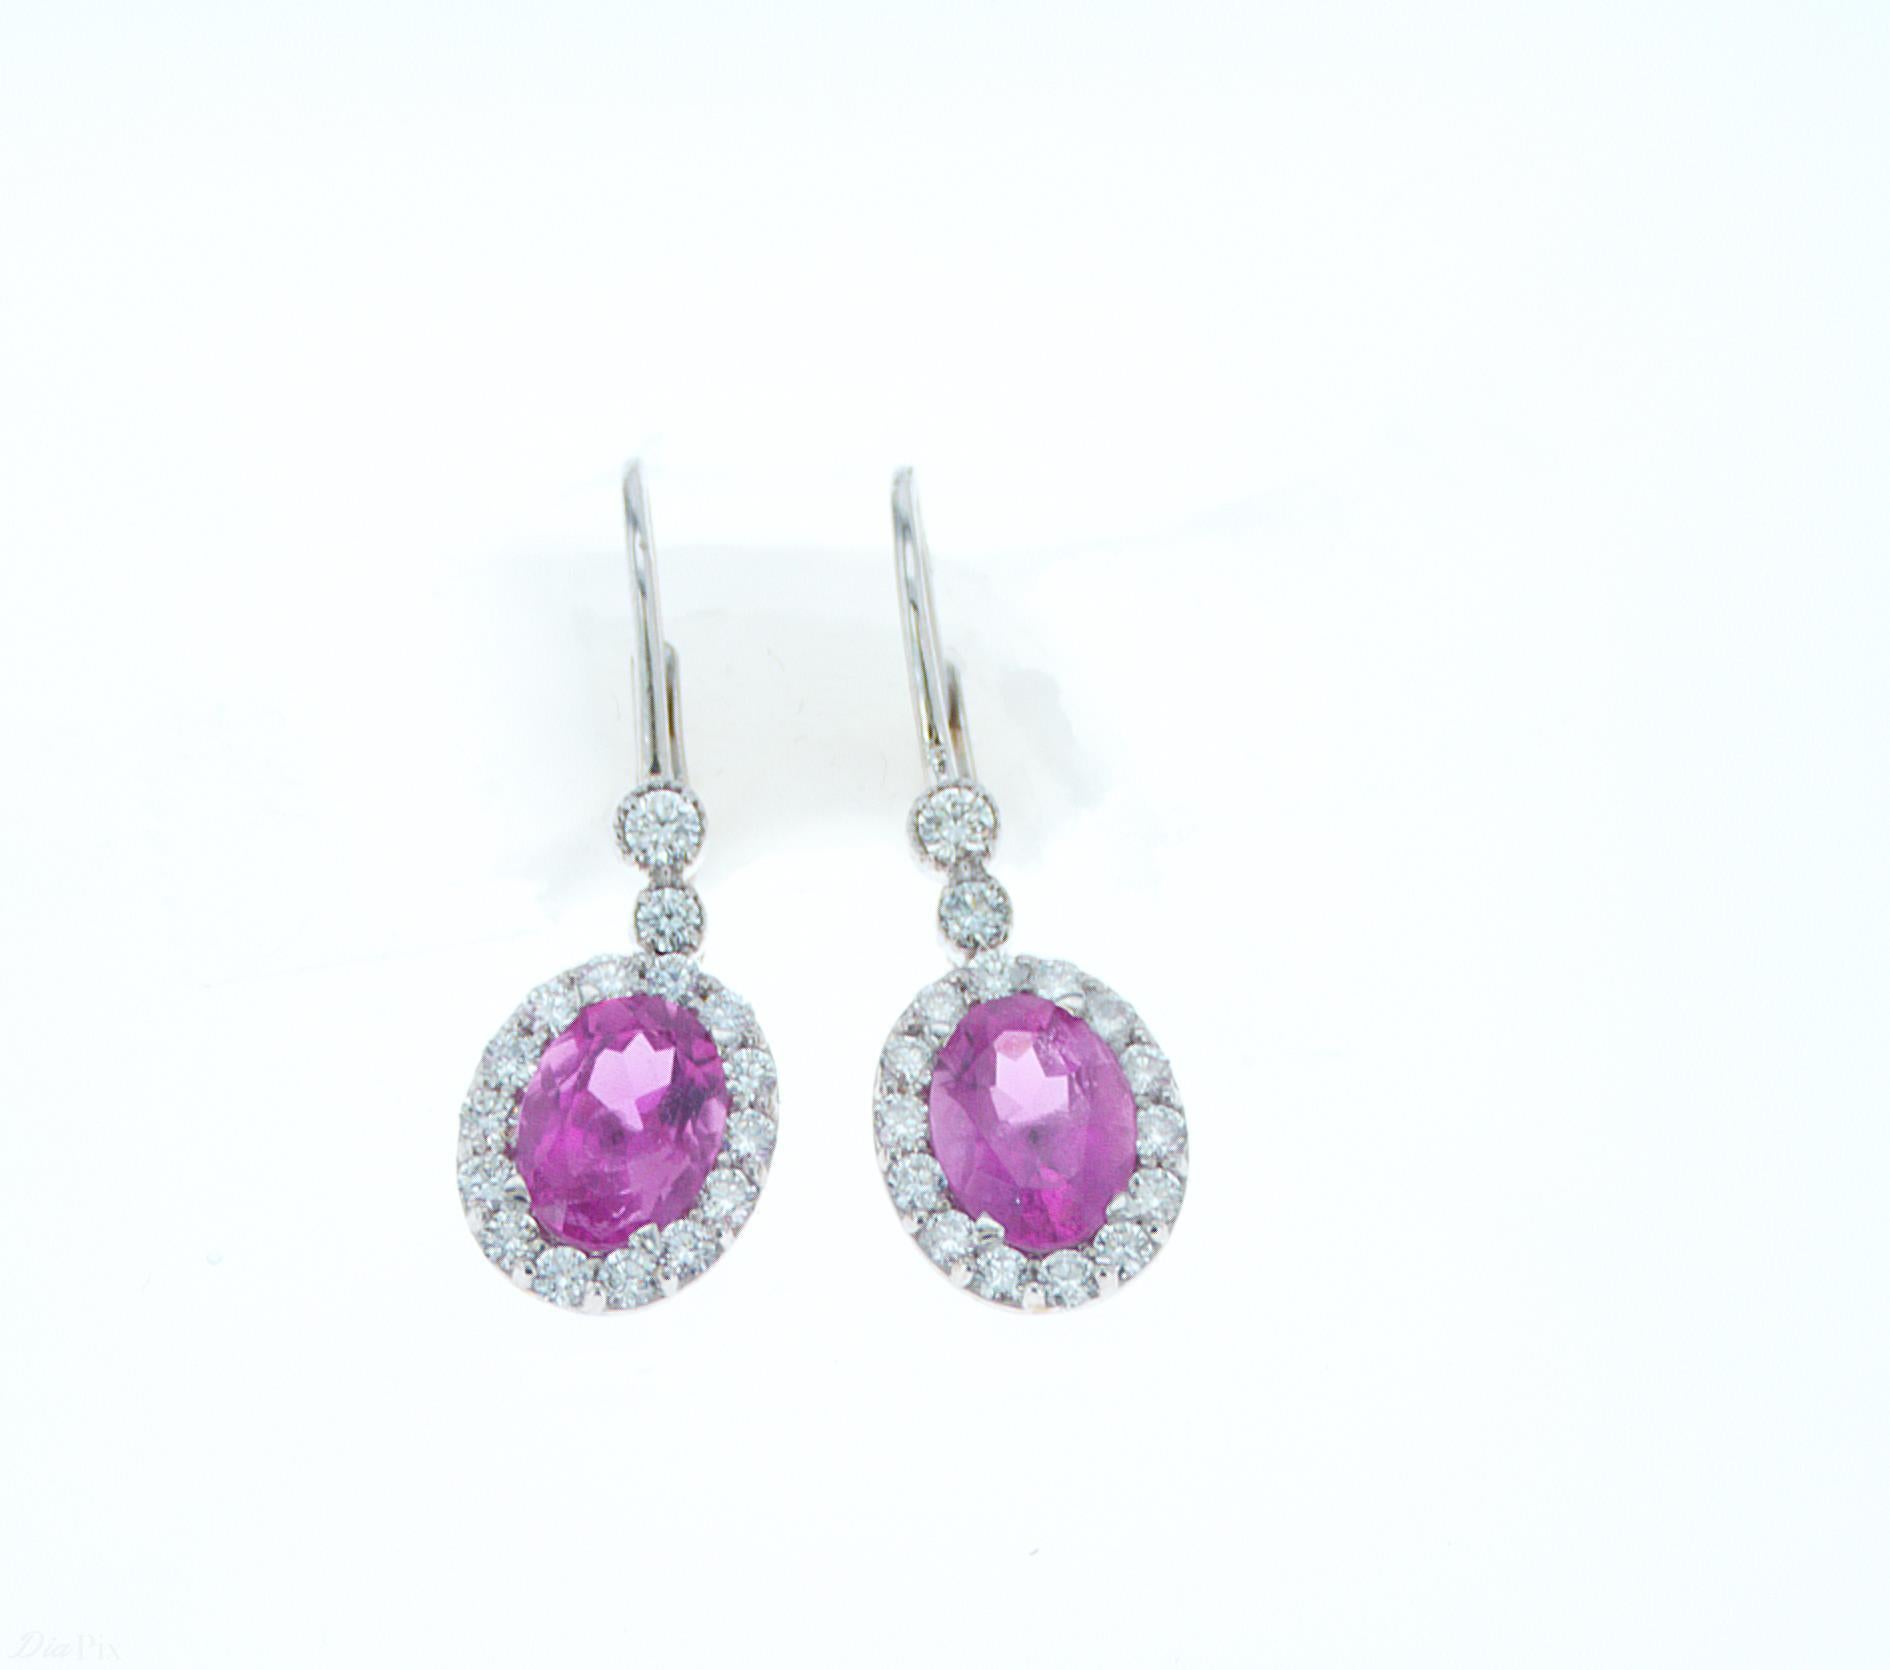 18k White Gold Earrings featuring 2.59ct TW of Oval Pink Tourmalines, and 0.77ct TW of Round Brilliant Diamonds.